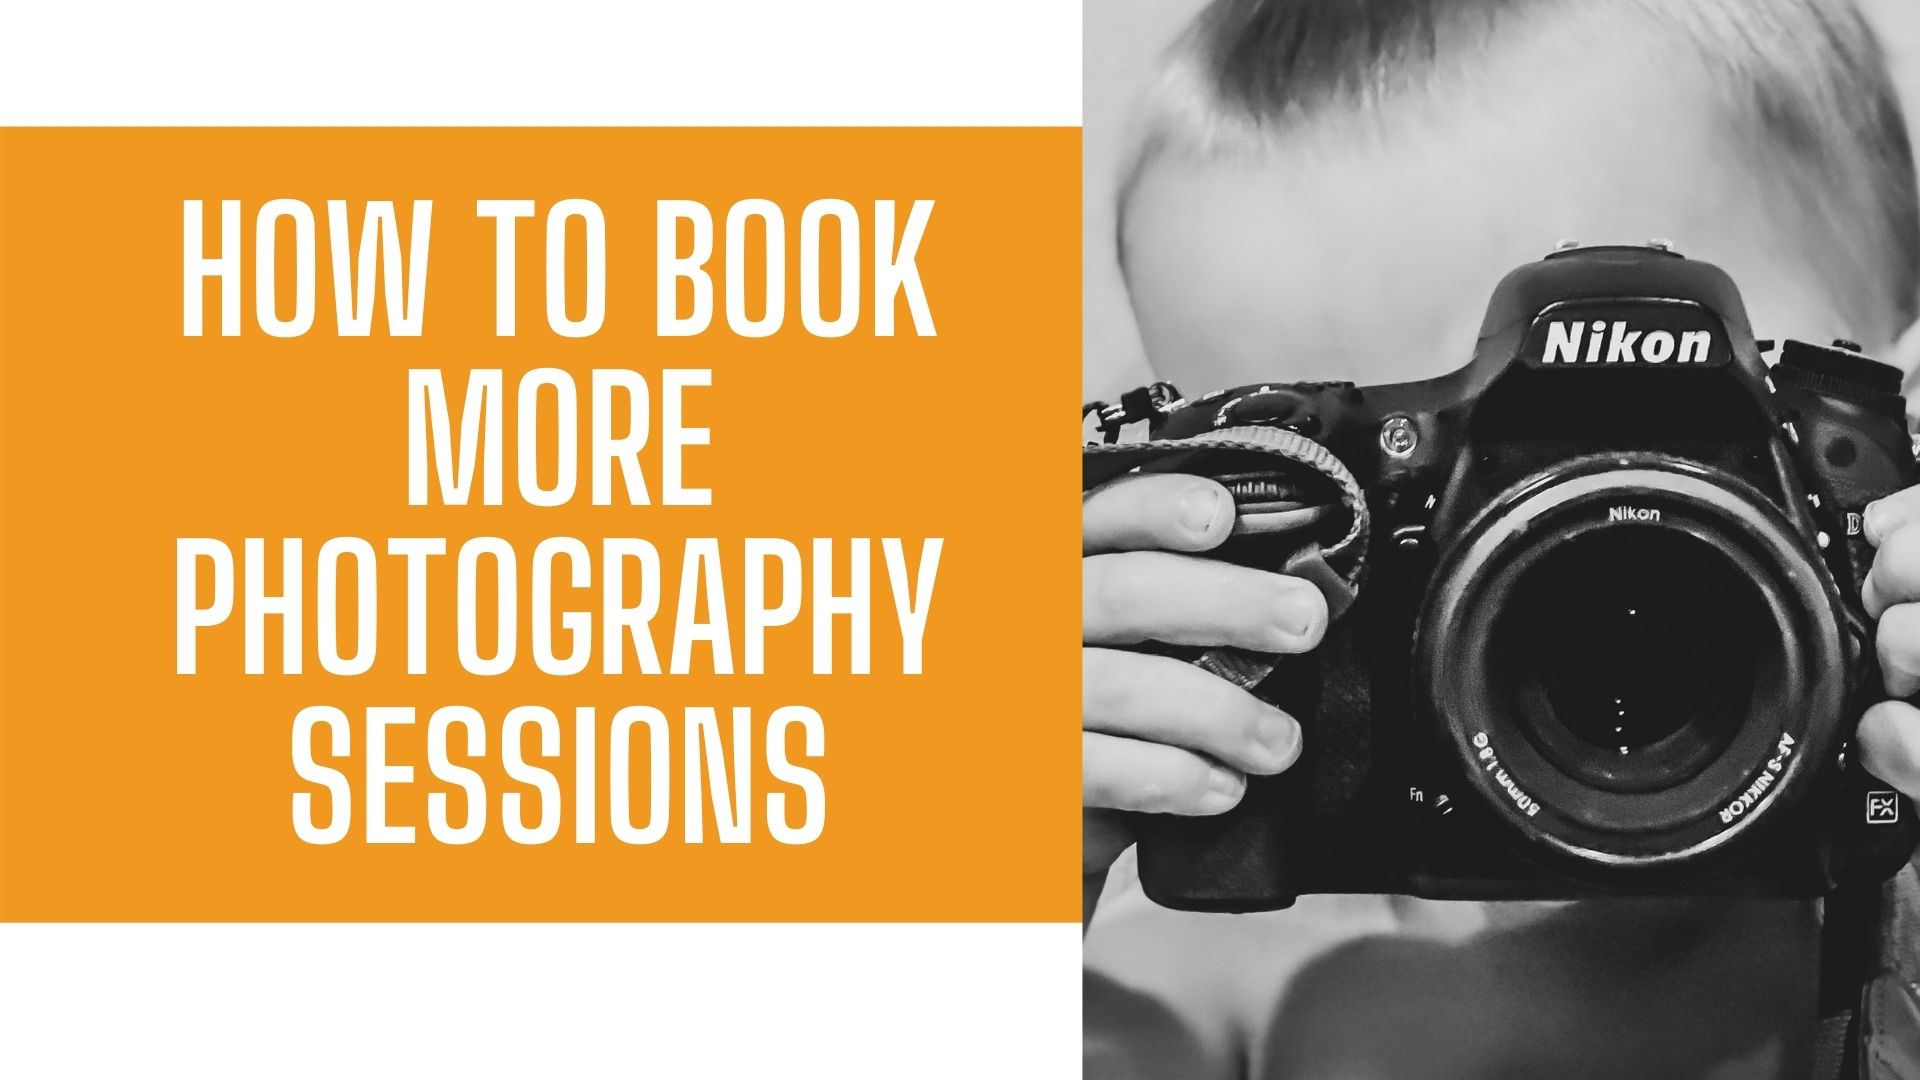 How To Book More Photography Sessions